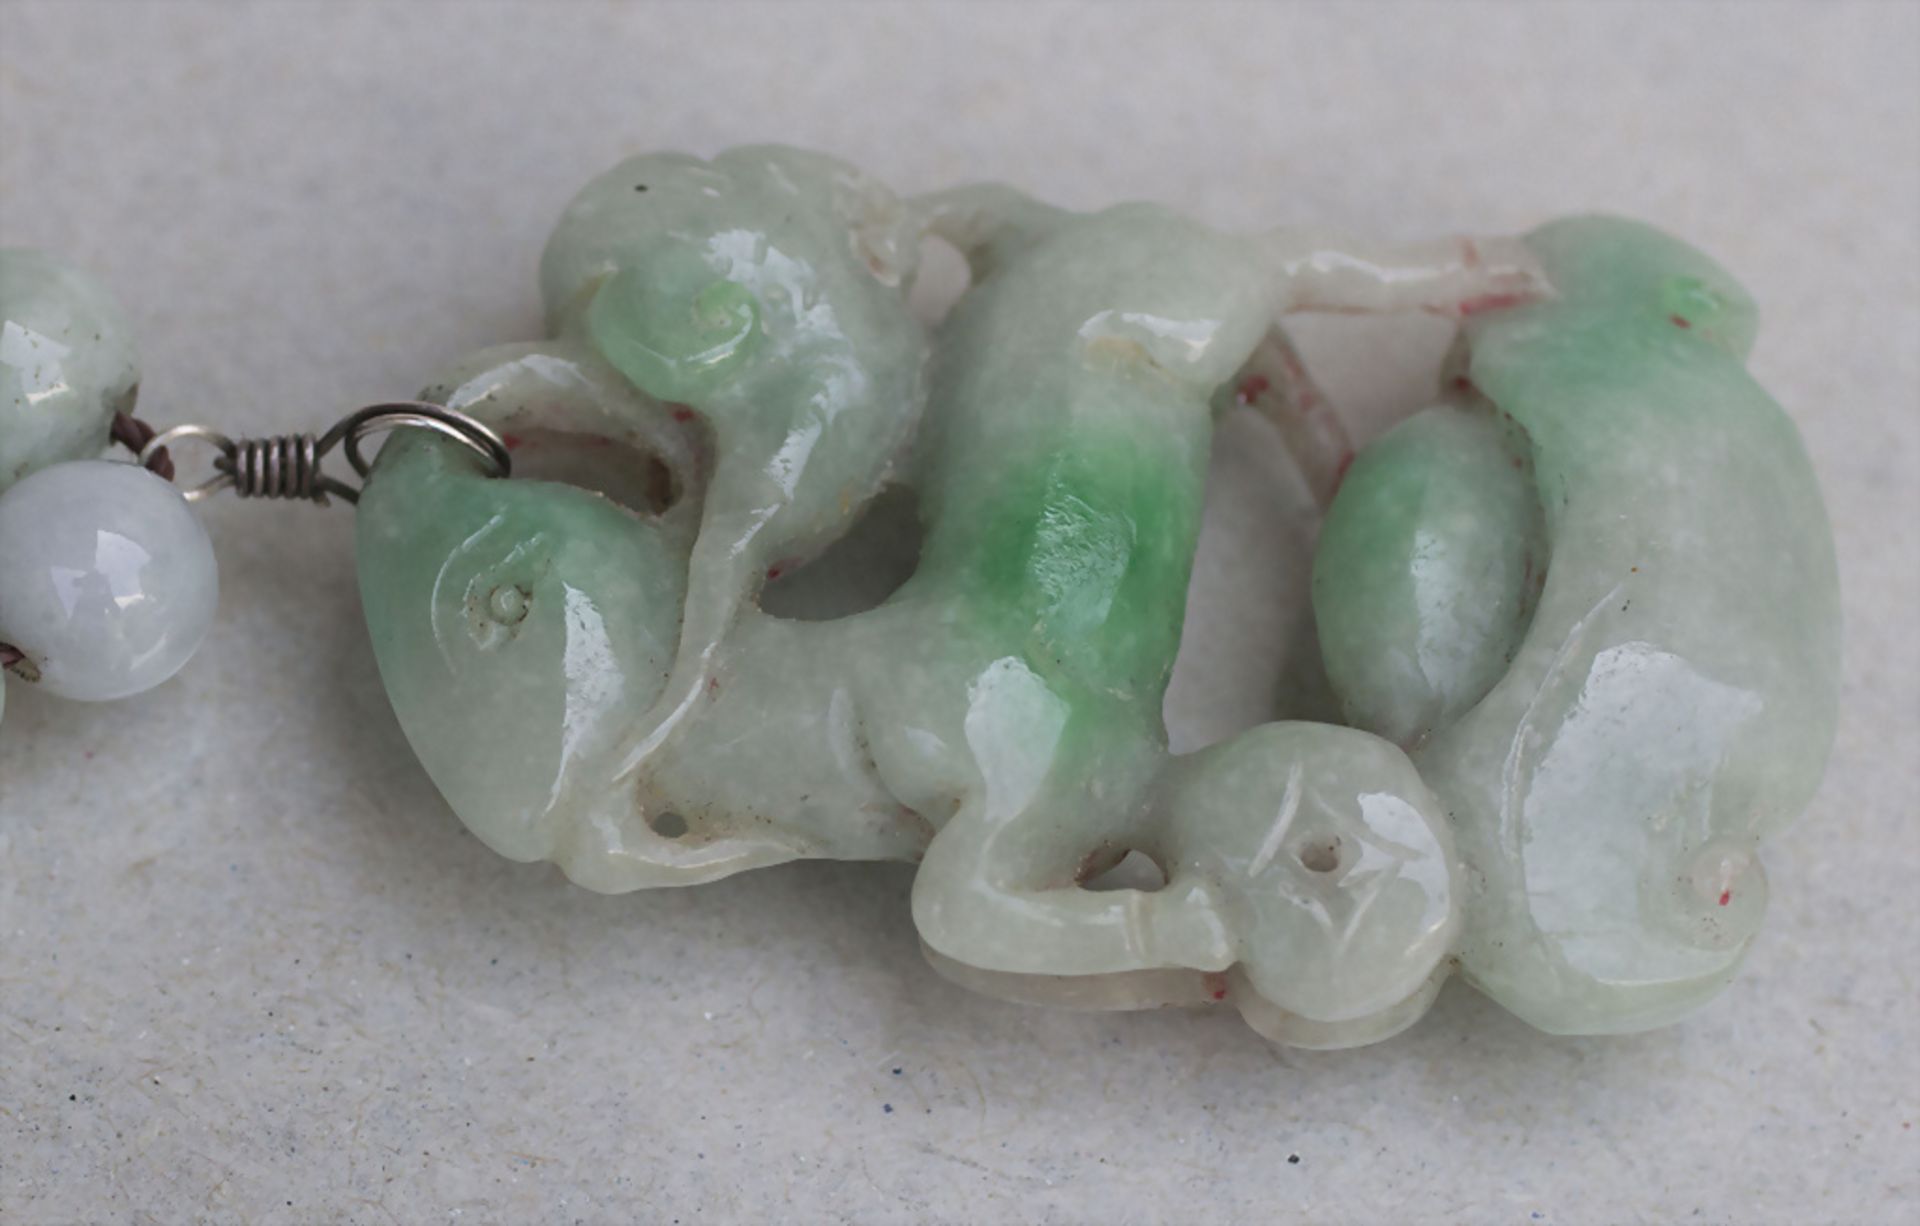 Jadekette mit Glückssymbol / A jade necklace with a lucky symbol, China, Qing-Dynastie (1644-1911) - Image 5 of 10